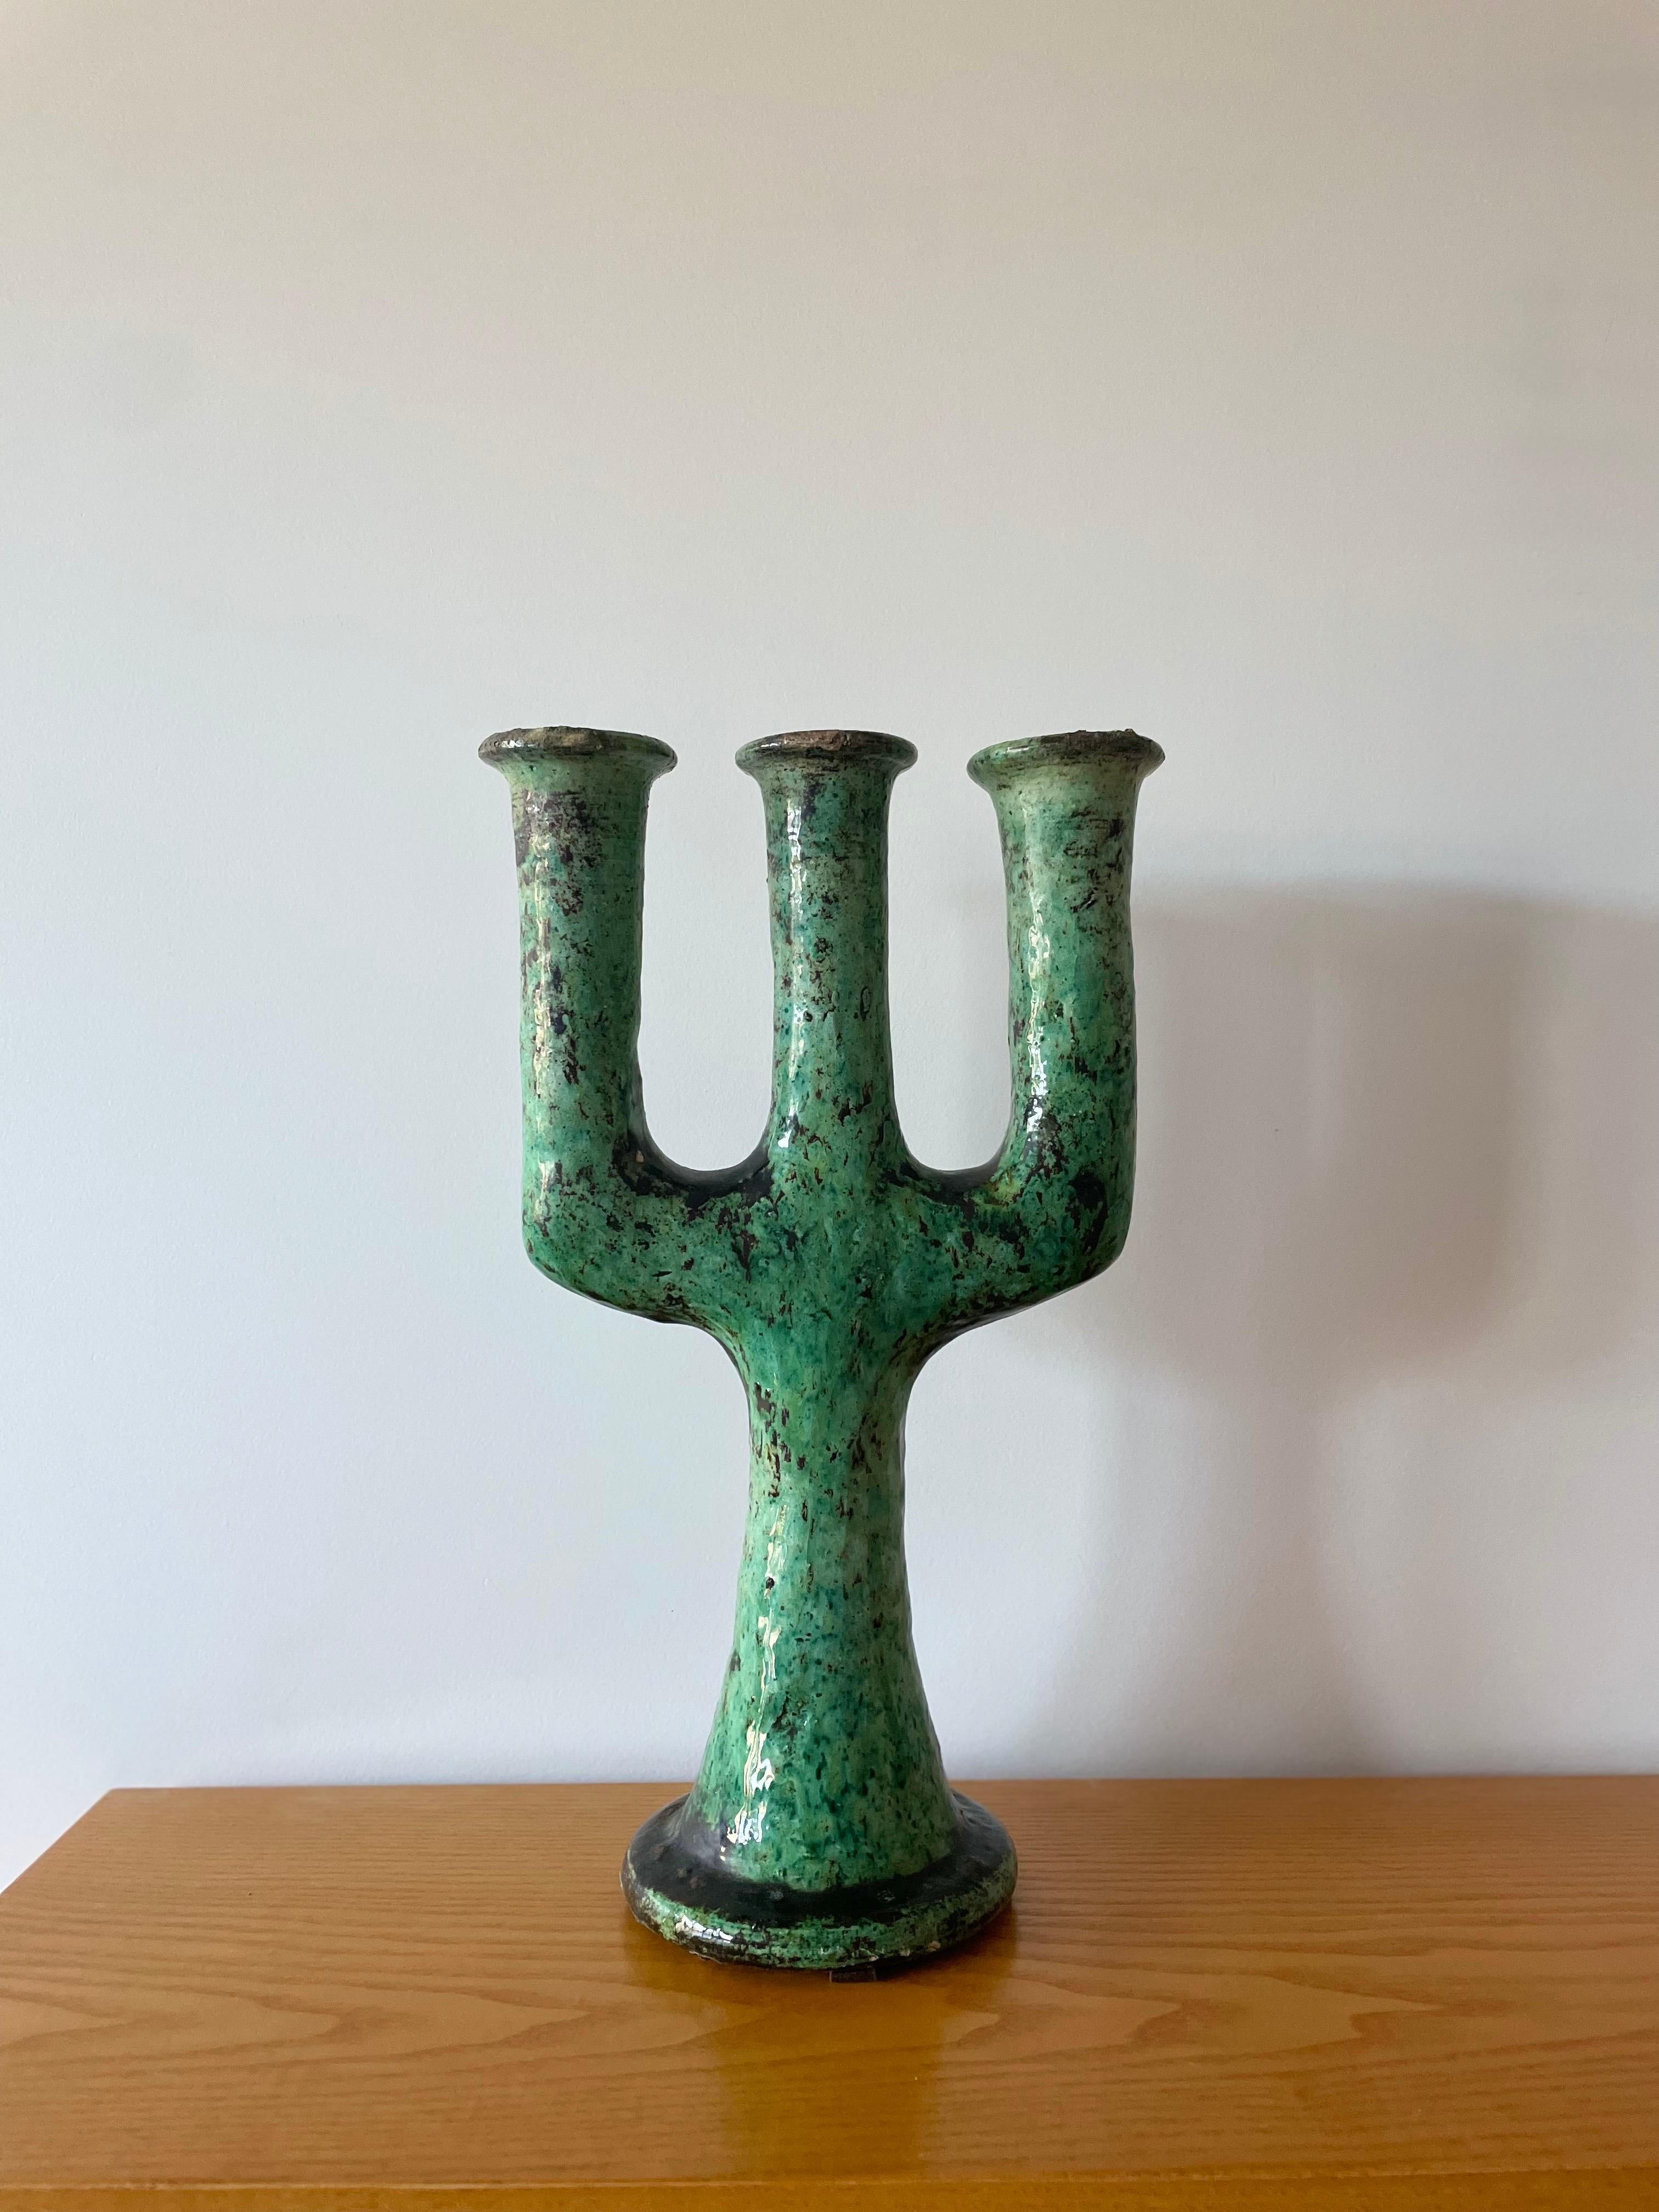 Moroccan Tamegroute Ceramic Candlestick in the style of Giacometti

This vintage handcrafted green enameled candlestick is a mere sculpture from Southern Moroccan village of Tamegroute, where skilled potters have practiced local techniques that have